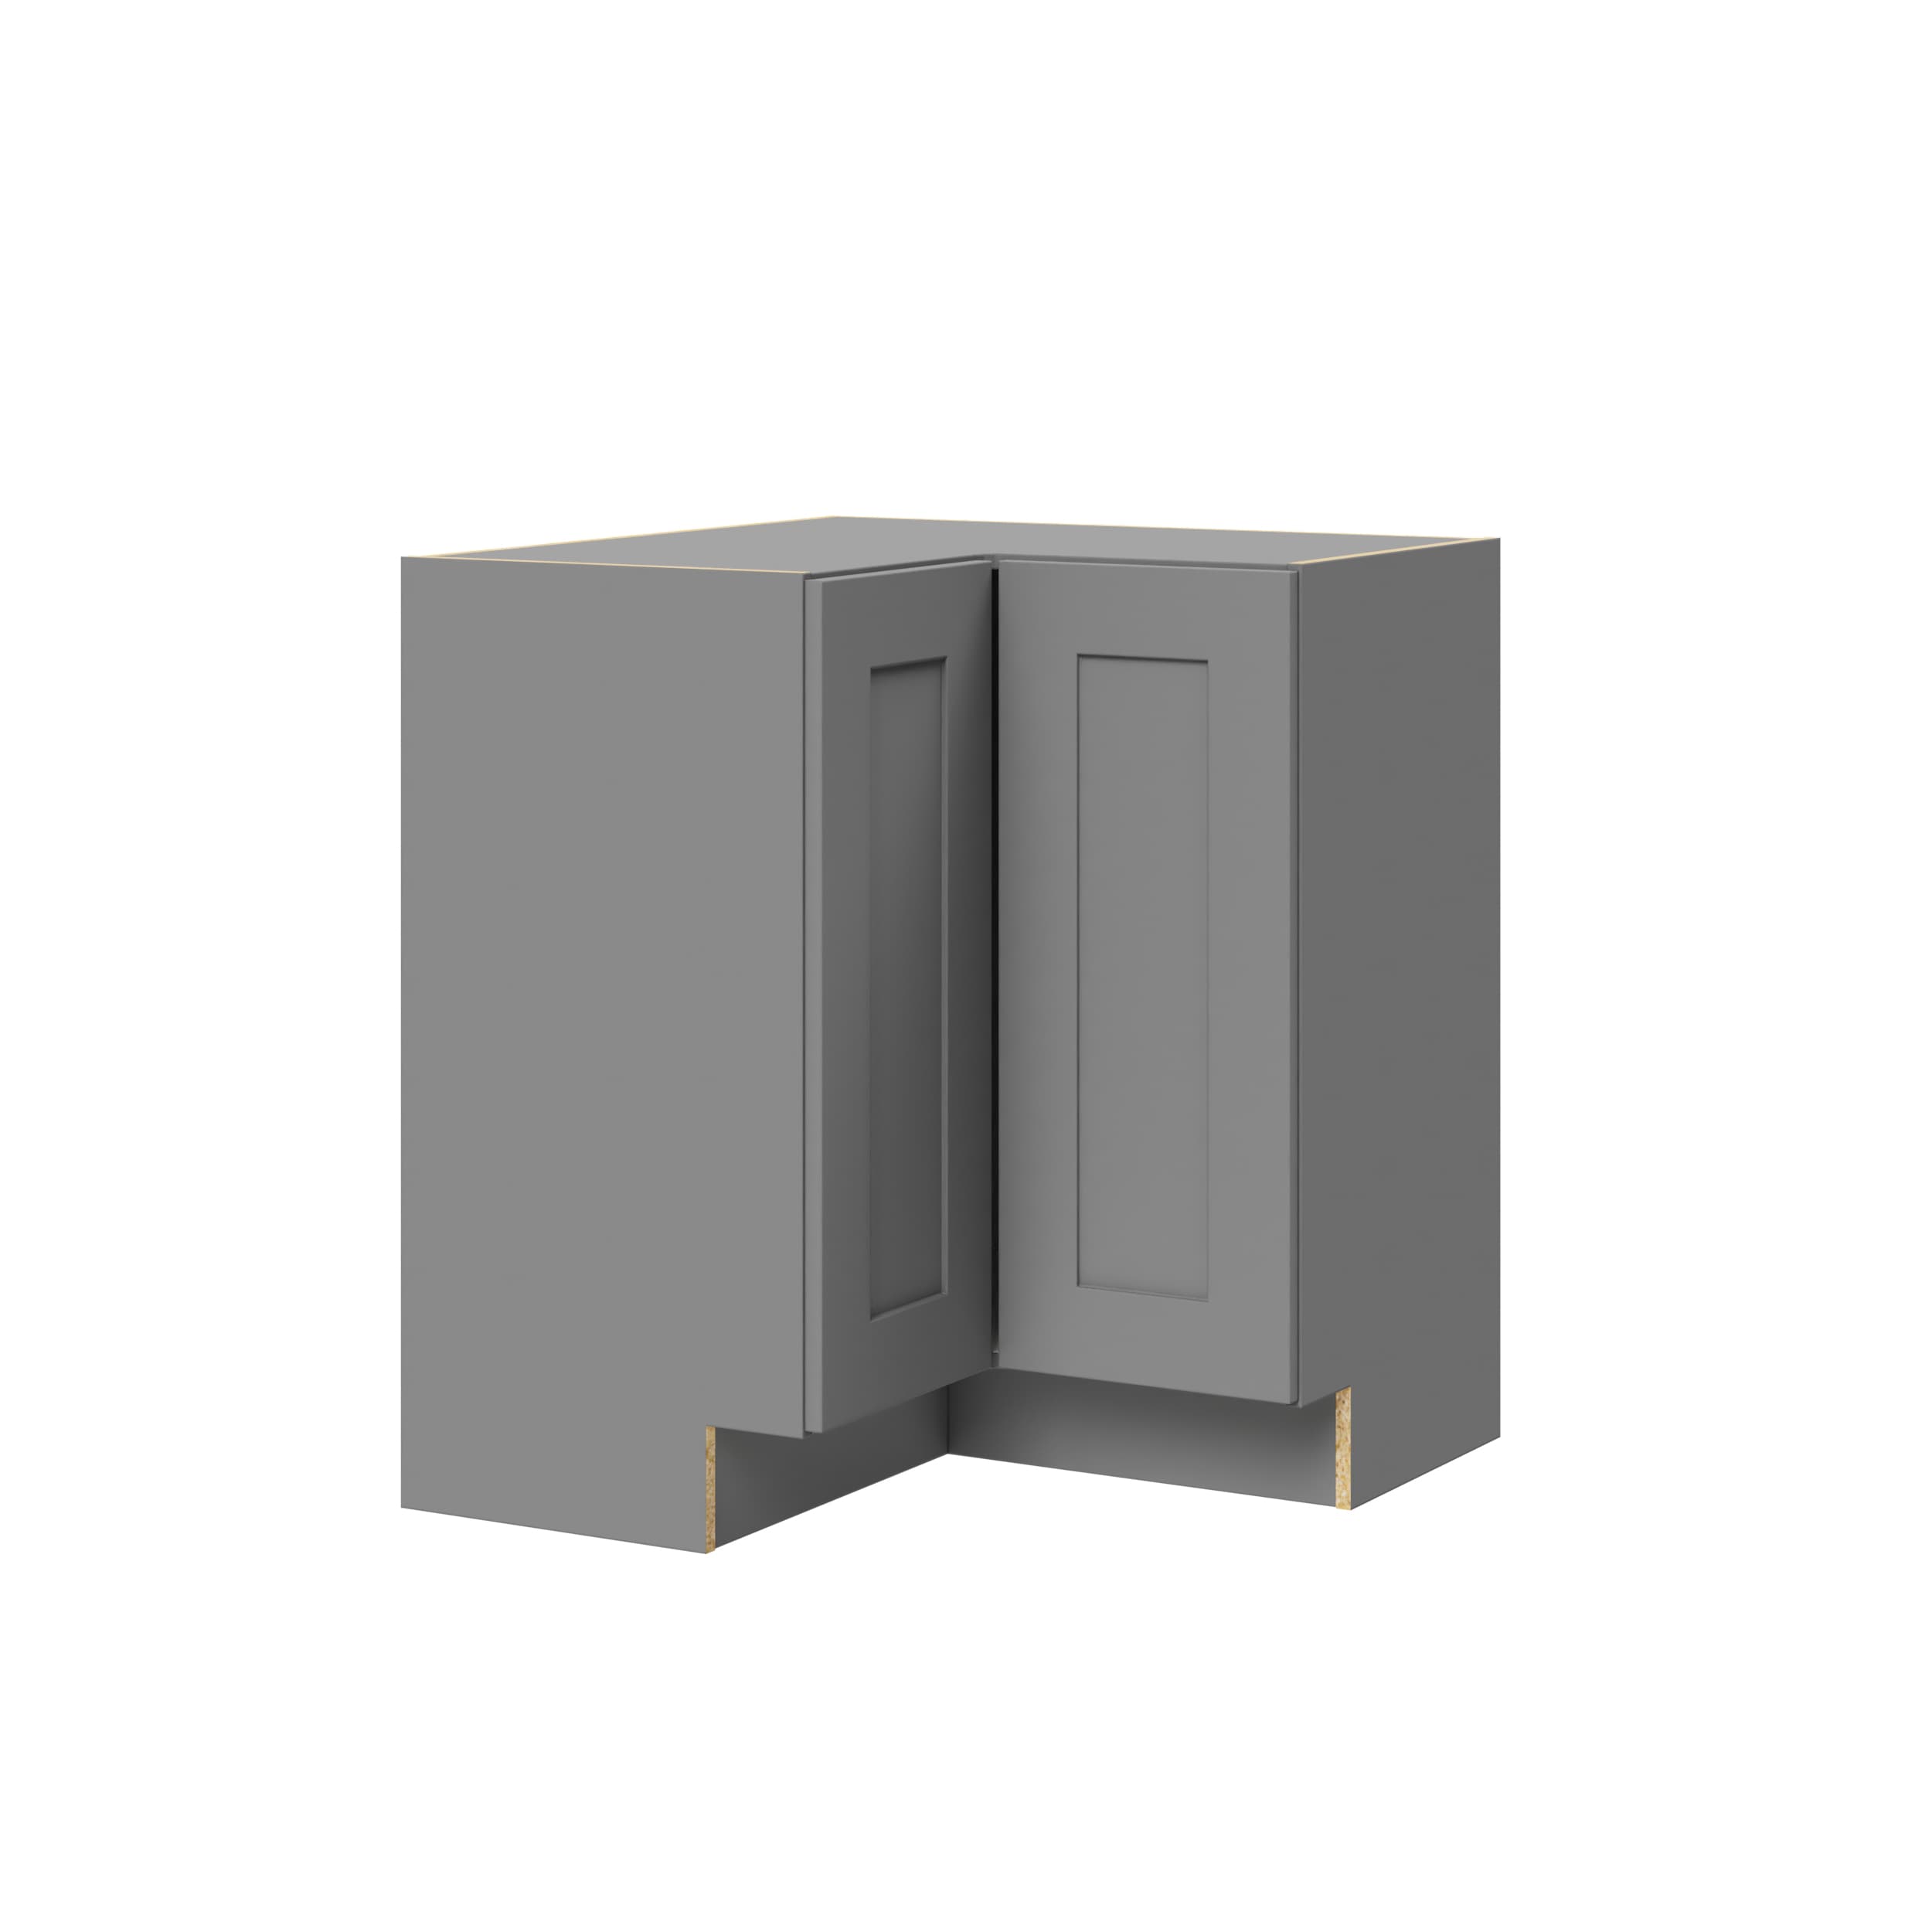 (Recessed H Lazy Cabinet Door 34.5-in Fully W x Laval Style) x Corner 30-in Susan at Assembled 30.8-in Hugo&Borg Gray D Base Shaker Panel Laval